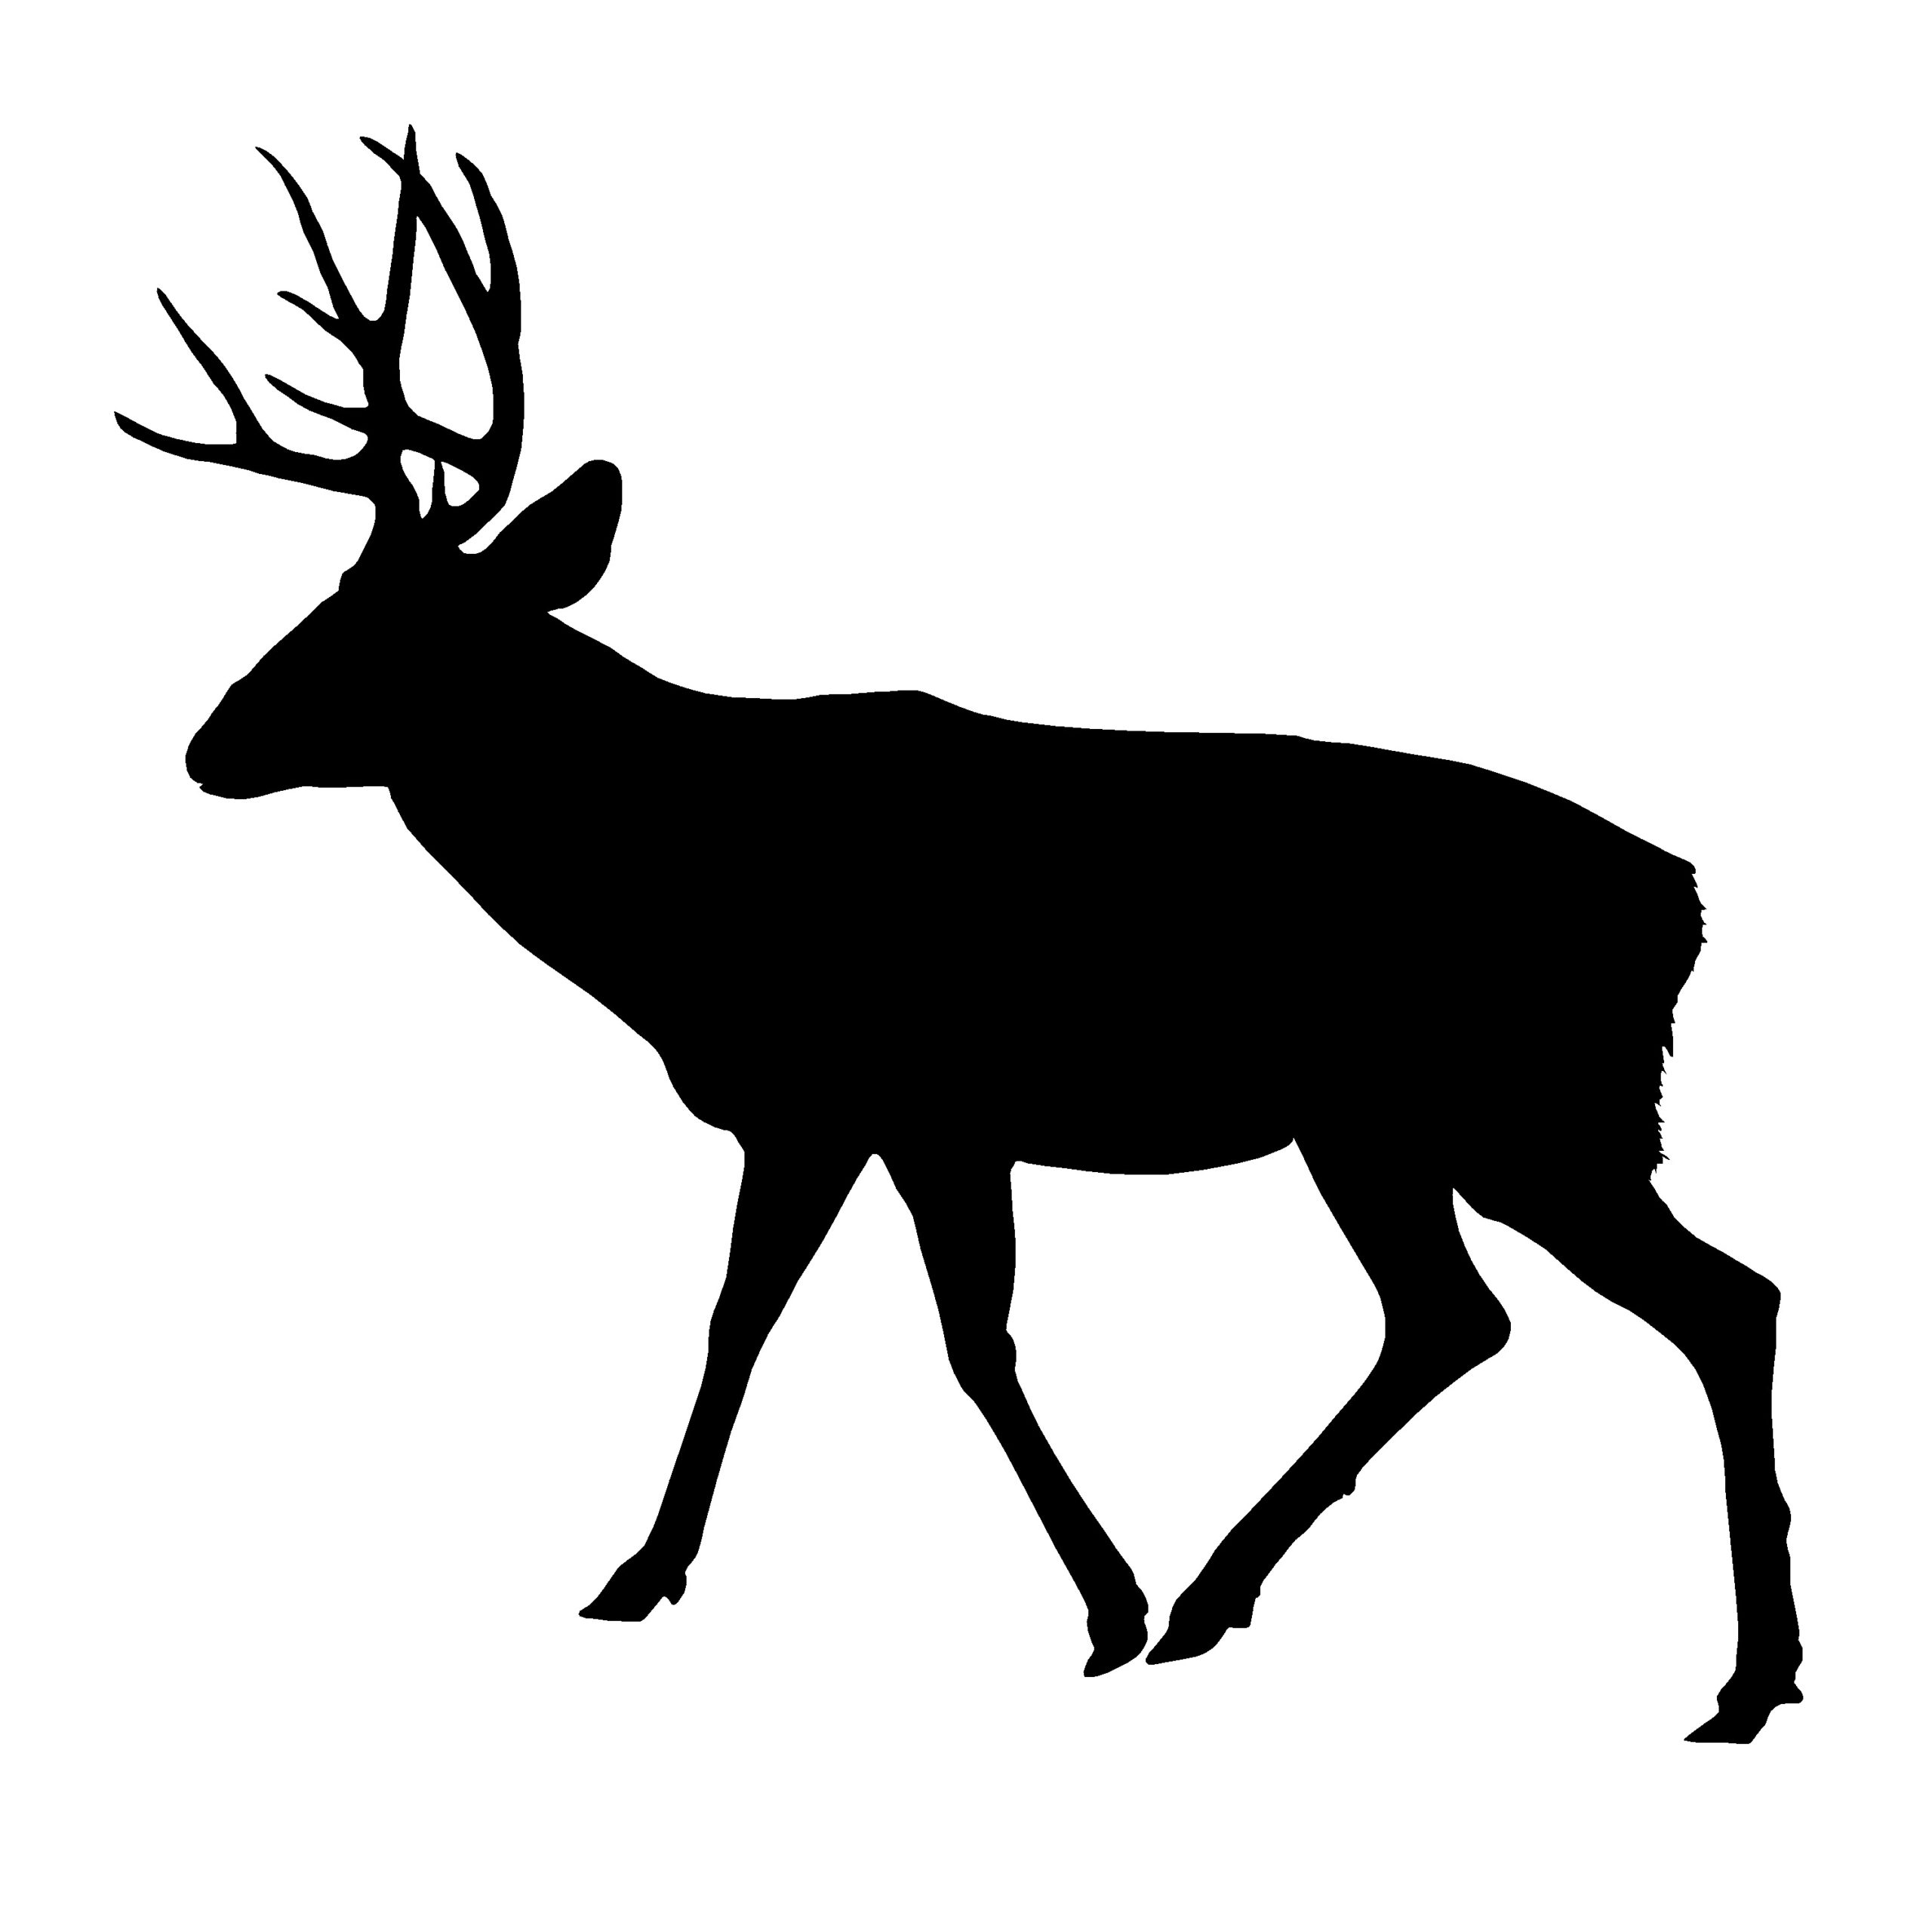 deer hunting stickers for trucks